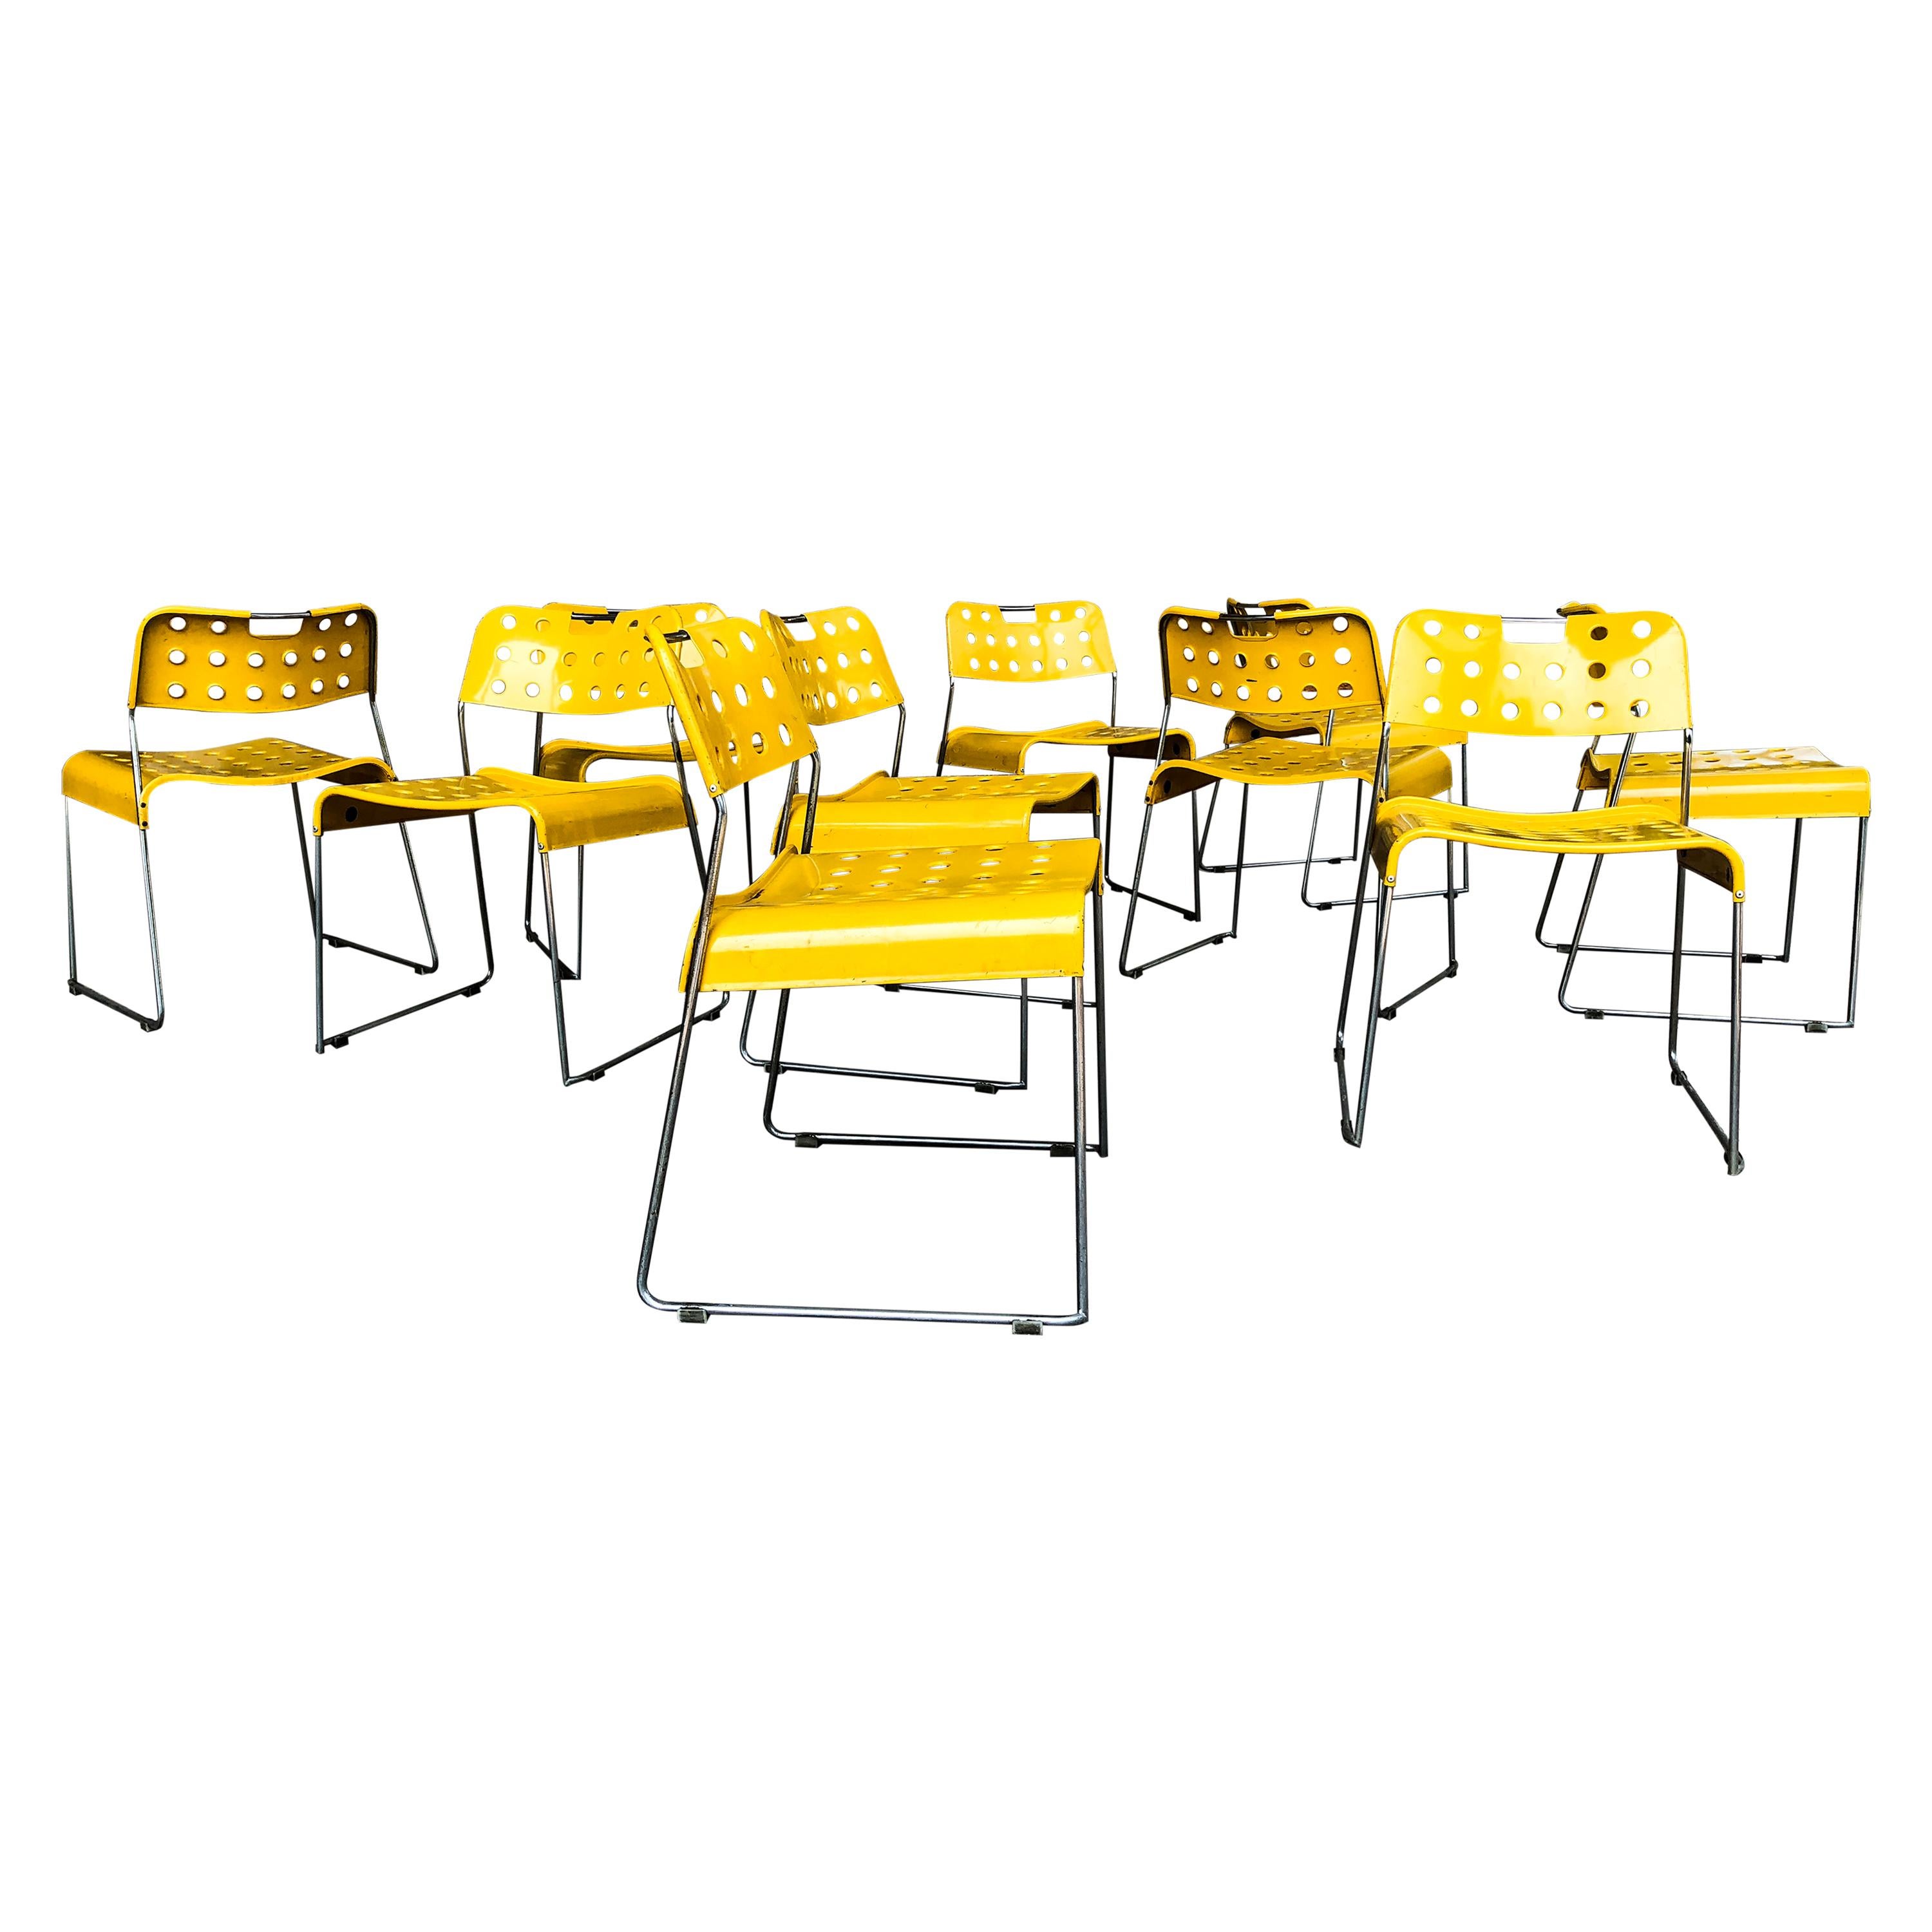 Rodney Kinsman Space Age Yellow Omstak Chair for Bieffeplast, 1971, Set of 6 For Sale 1